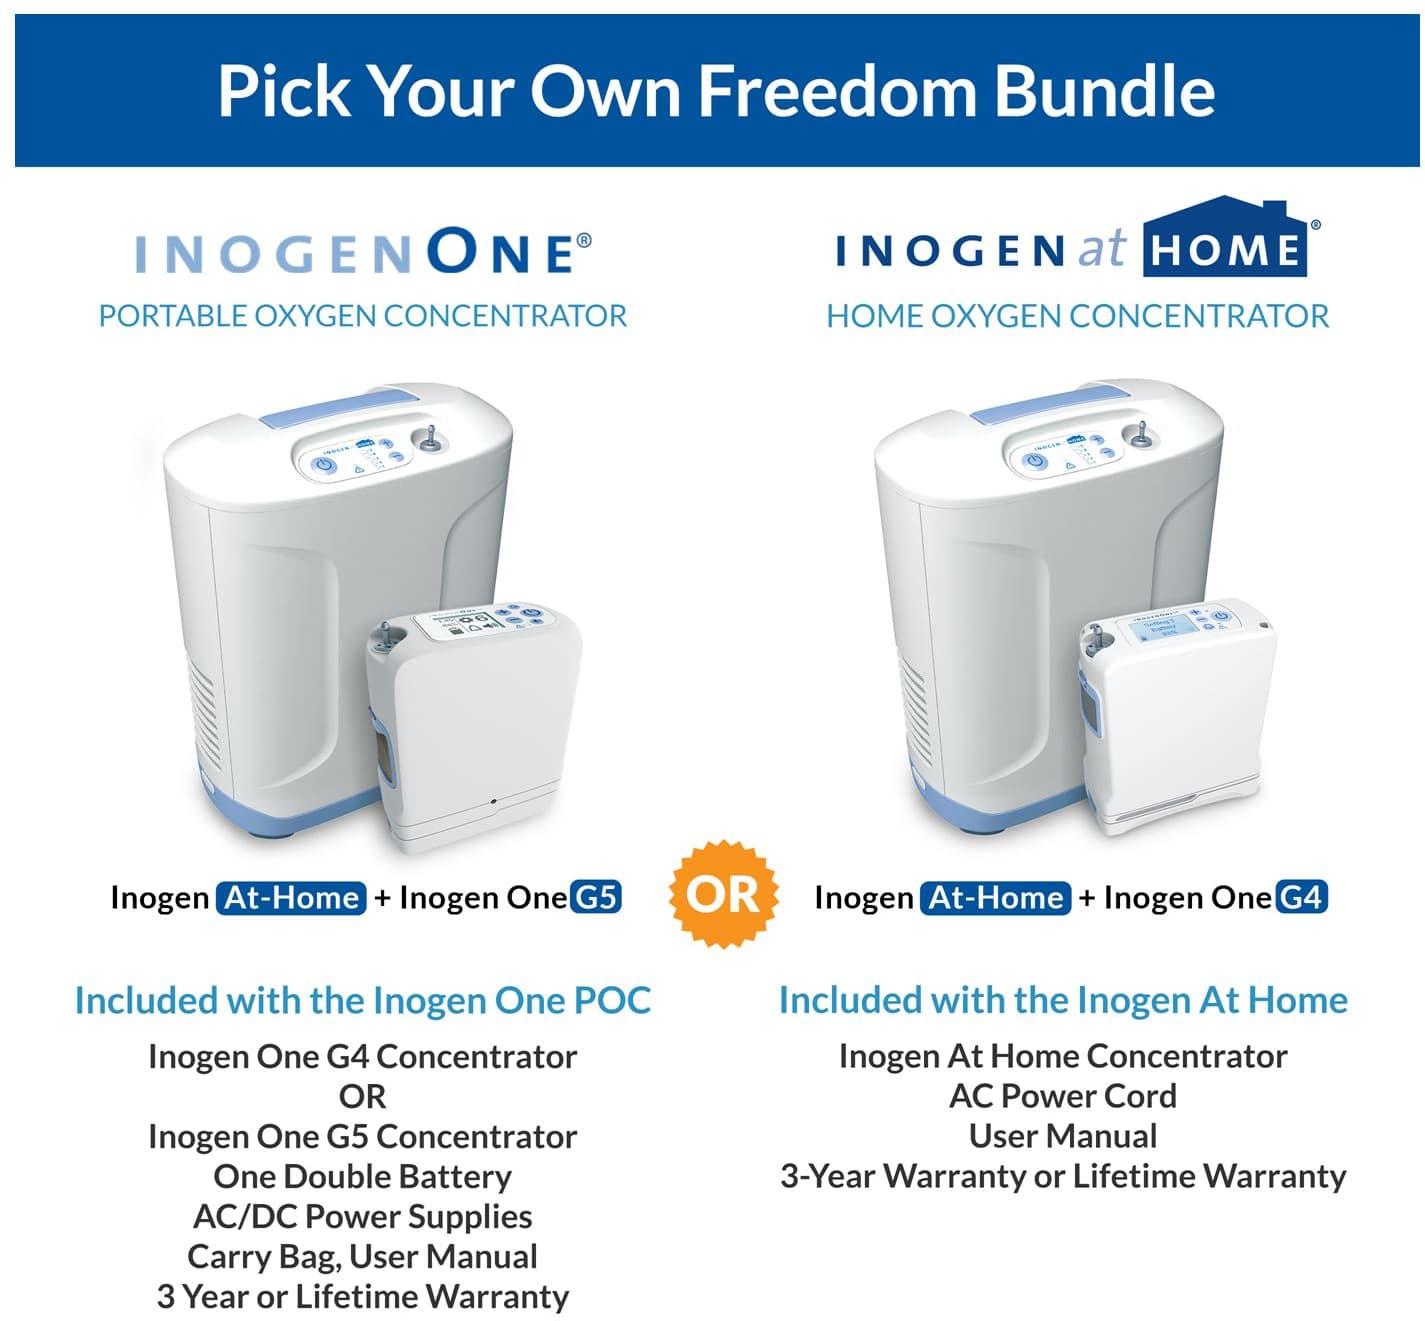 Pick your own freedom bundle. Pair an Inogen at Home Concentrator with an Inogen One G4 or G5 concentrator.